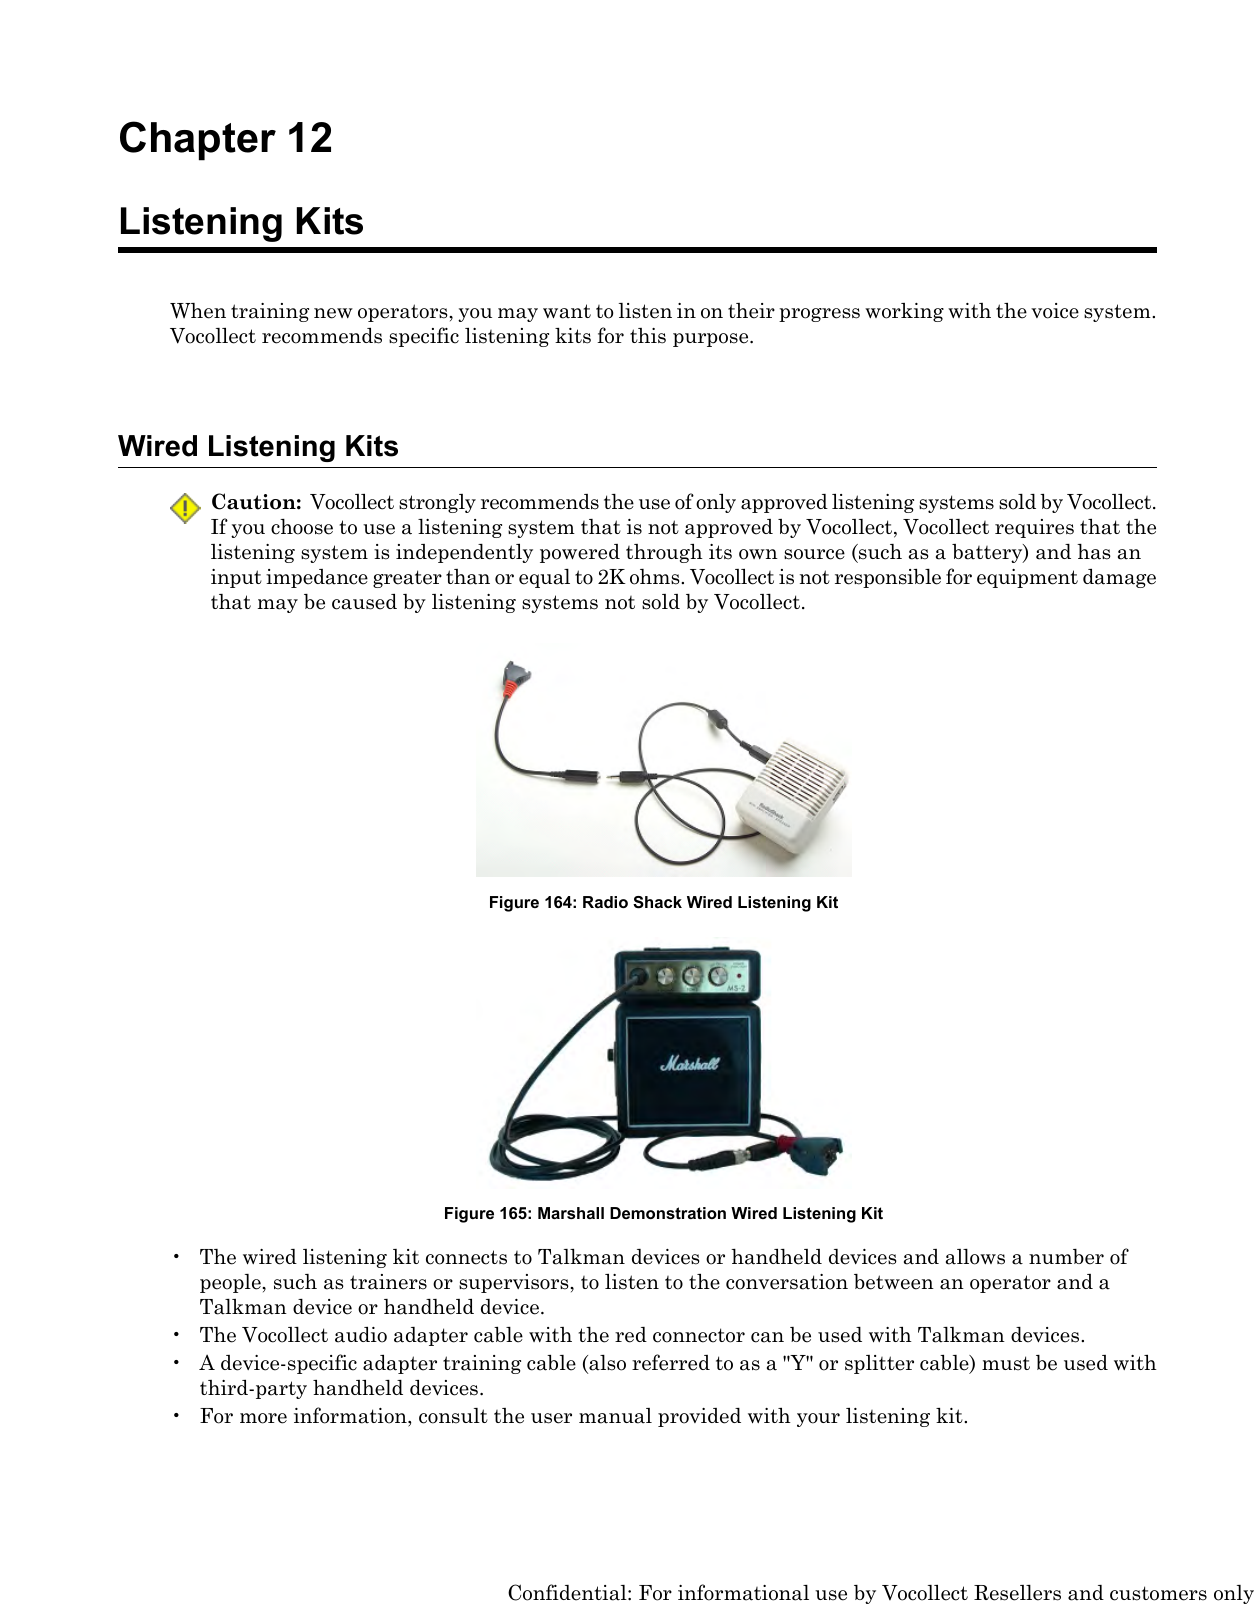 Chapter 12Listening KitsWhen training new operators, you may want to listen in on their progress working with the voice system.Vocollect recommends specific listening kits for this purpose.Wired Listening KitsCaution: Vocollect strongly recommends the use of only approved listening systems sold by Vocollect.If you choose to use a listening system that is not approved by Vocollect, Vocollect requires that thelistening system is independently powered through its own source (such as a battery) and has aninput impedance greater than or equal to 2K ohms. Vocollect is not responsible for equipment damagethat may be caused by listening systems not sold by Vocollect.Figure 164: Radio Shack Wired Listening KitFigure 165: Marshall Demonstration Wired Listening Kit• The wired listening kit connects to Talkman devices or handheld devices and allows a number ofpeople, such as trainers or supervisors, to listen to the conversation between an operator and aTalkman device or handheld device.• The Vocollect audio adapter cable with the red connector can be used with Talkman devices.• A device-specific adapter training cable (also referred to as a &quot;Y&quot; or splitter cable) must be used withthird-party handheld devices.• For more information, consult the user manual provided with your listening kit.Confidential: For informational use by Vocollect Resellers and customers only